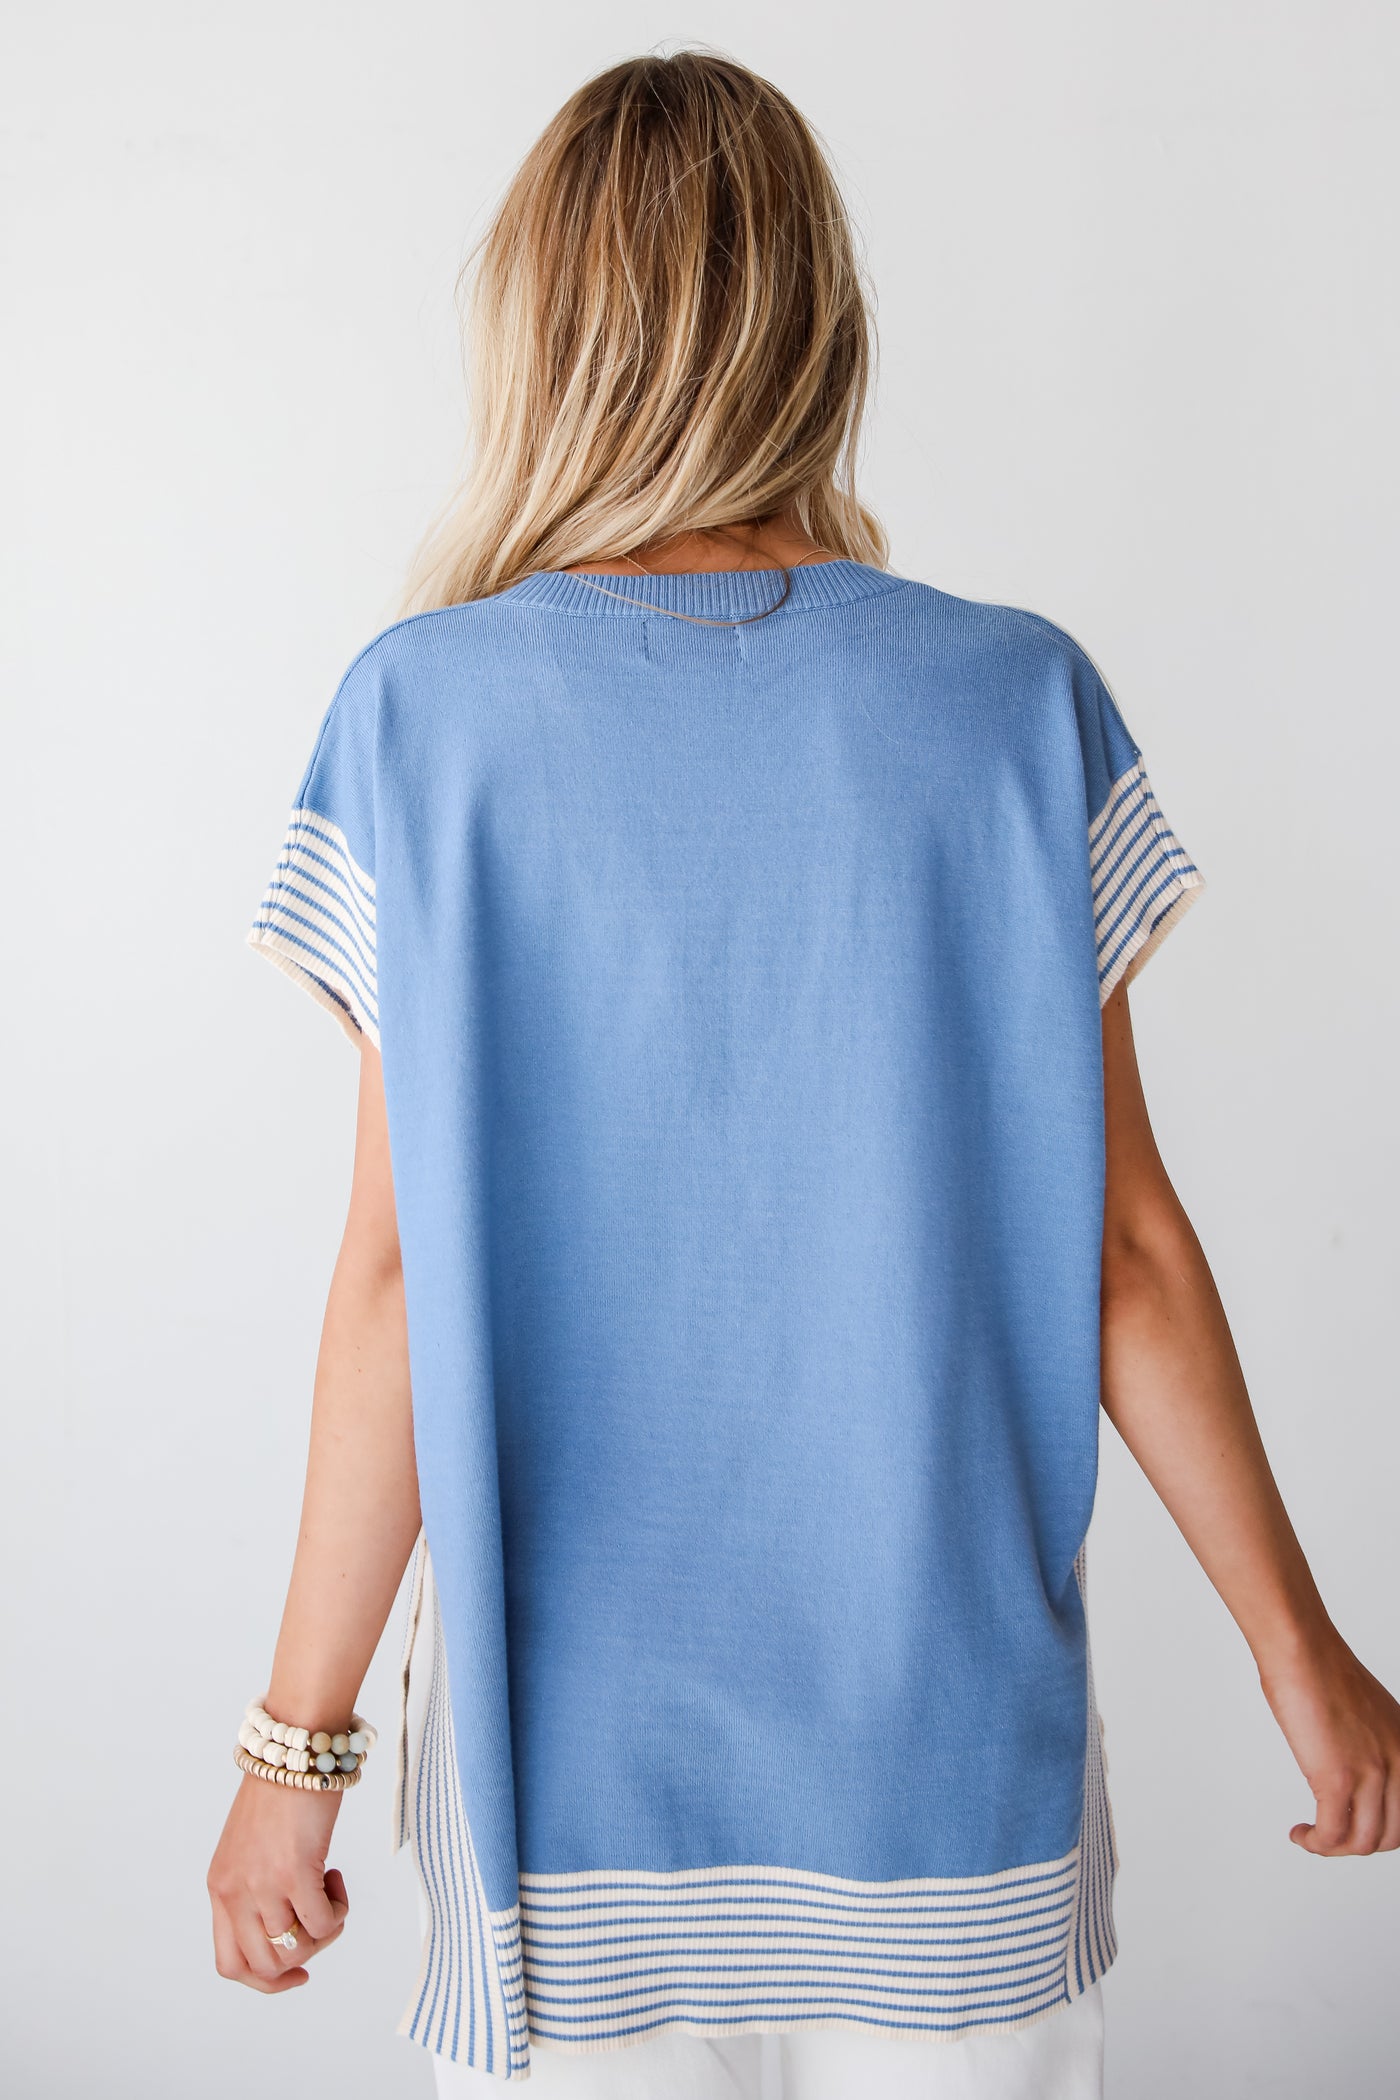 Blue Striped Oversized Knit Top for women